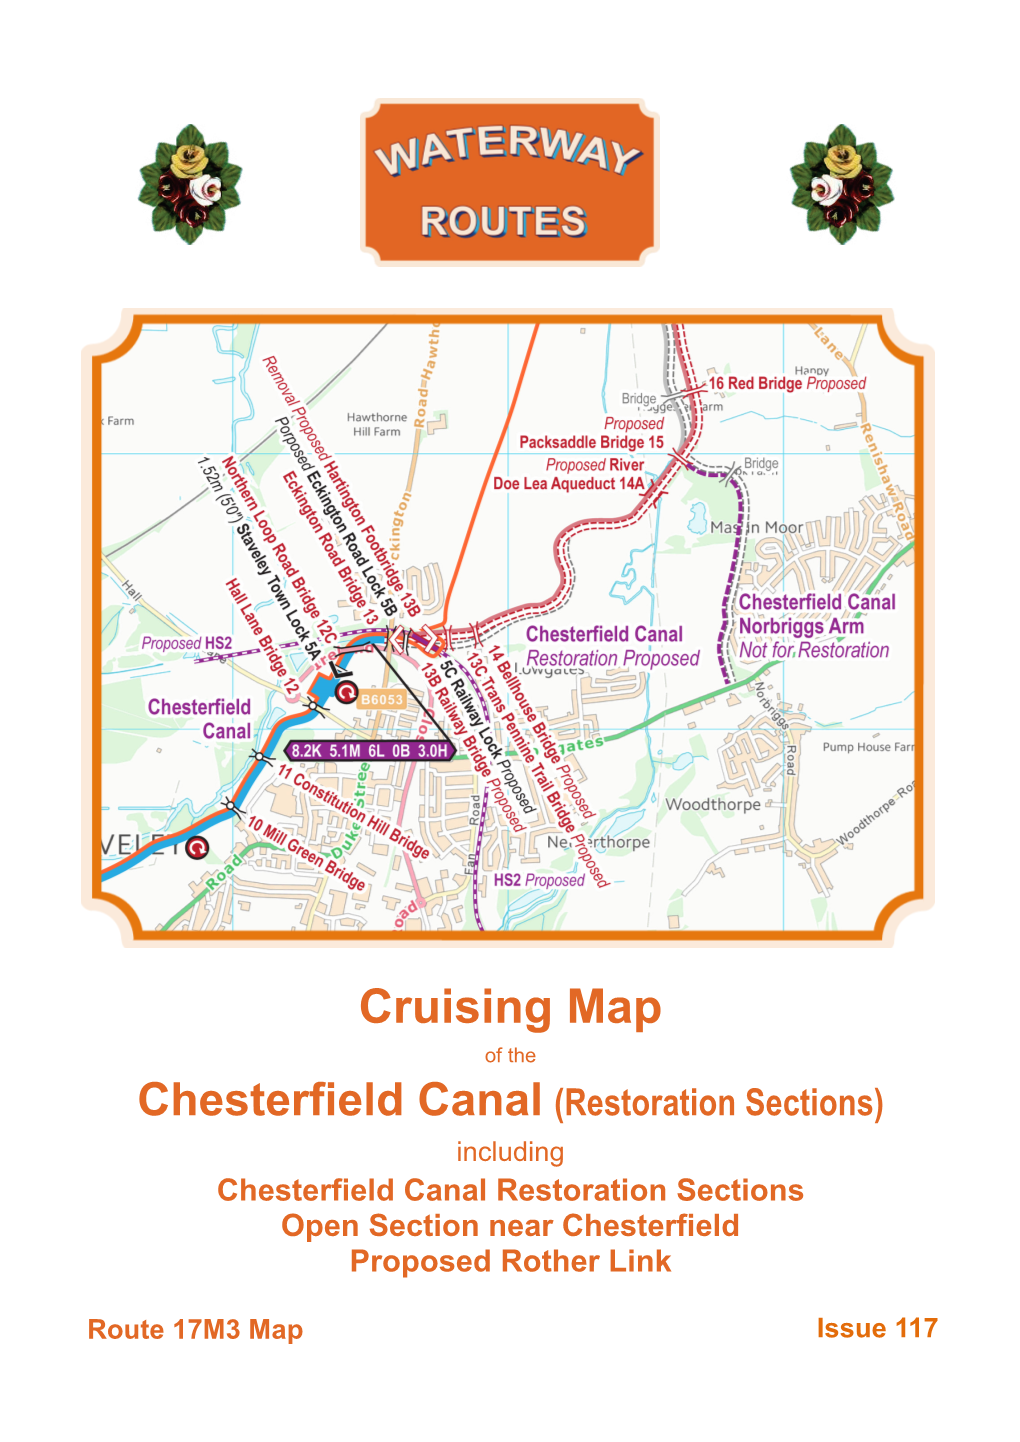 Chesterfield Canal (Restoration Section)